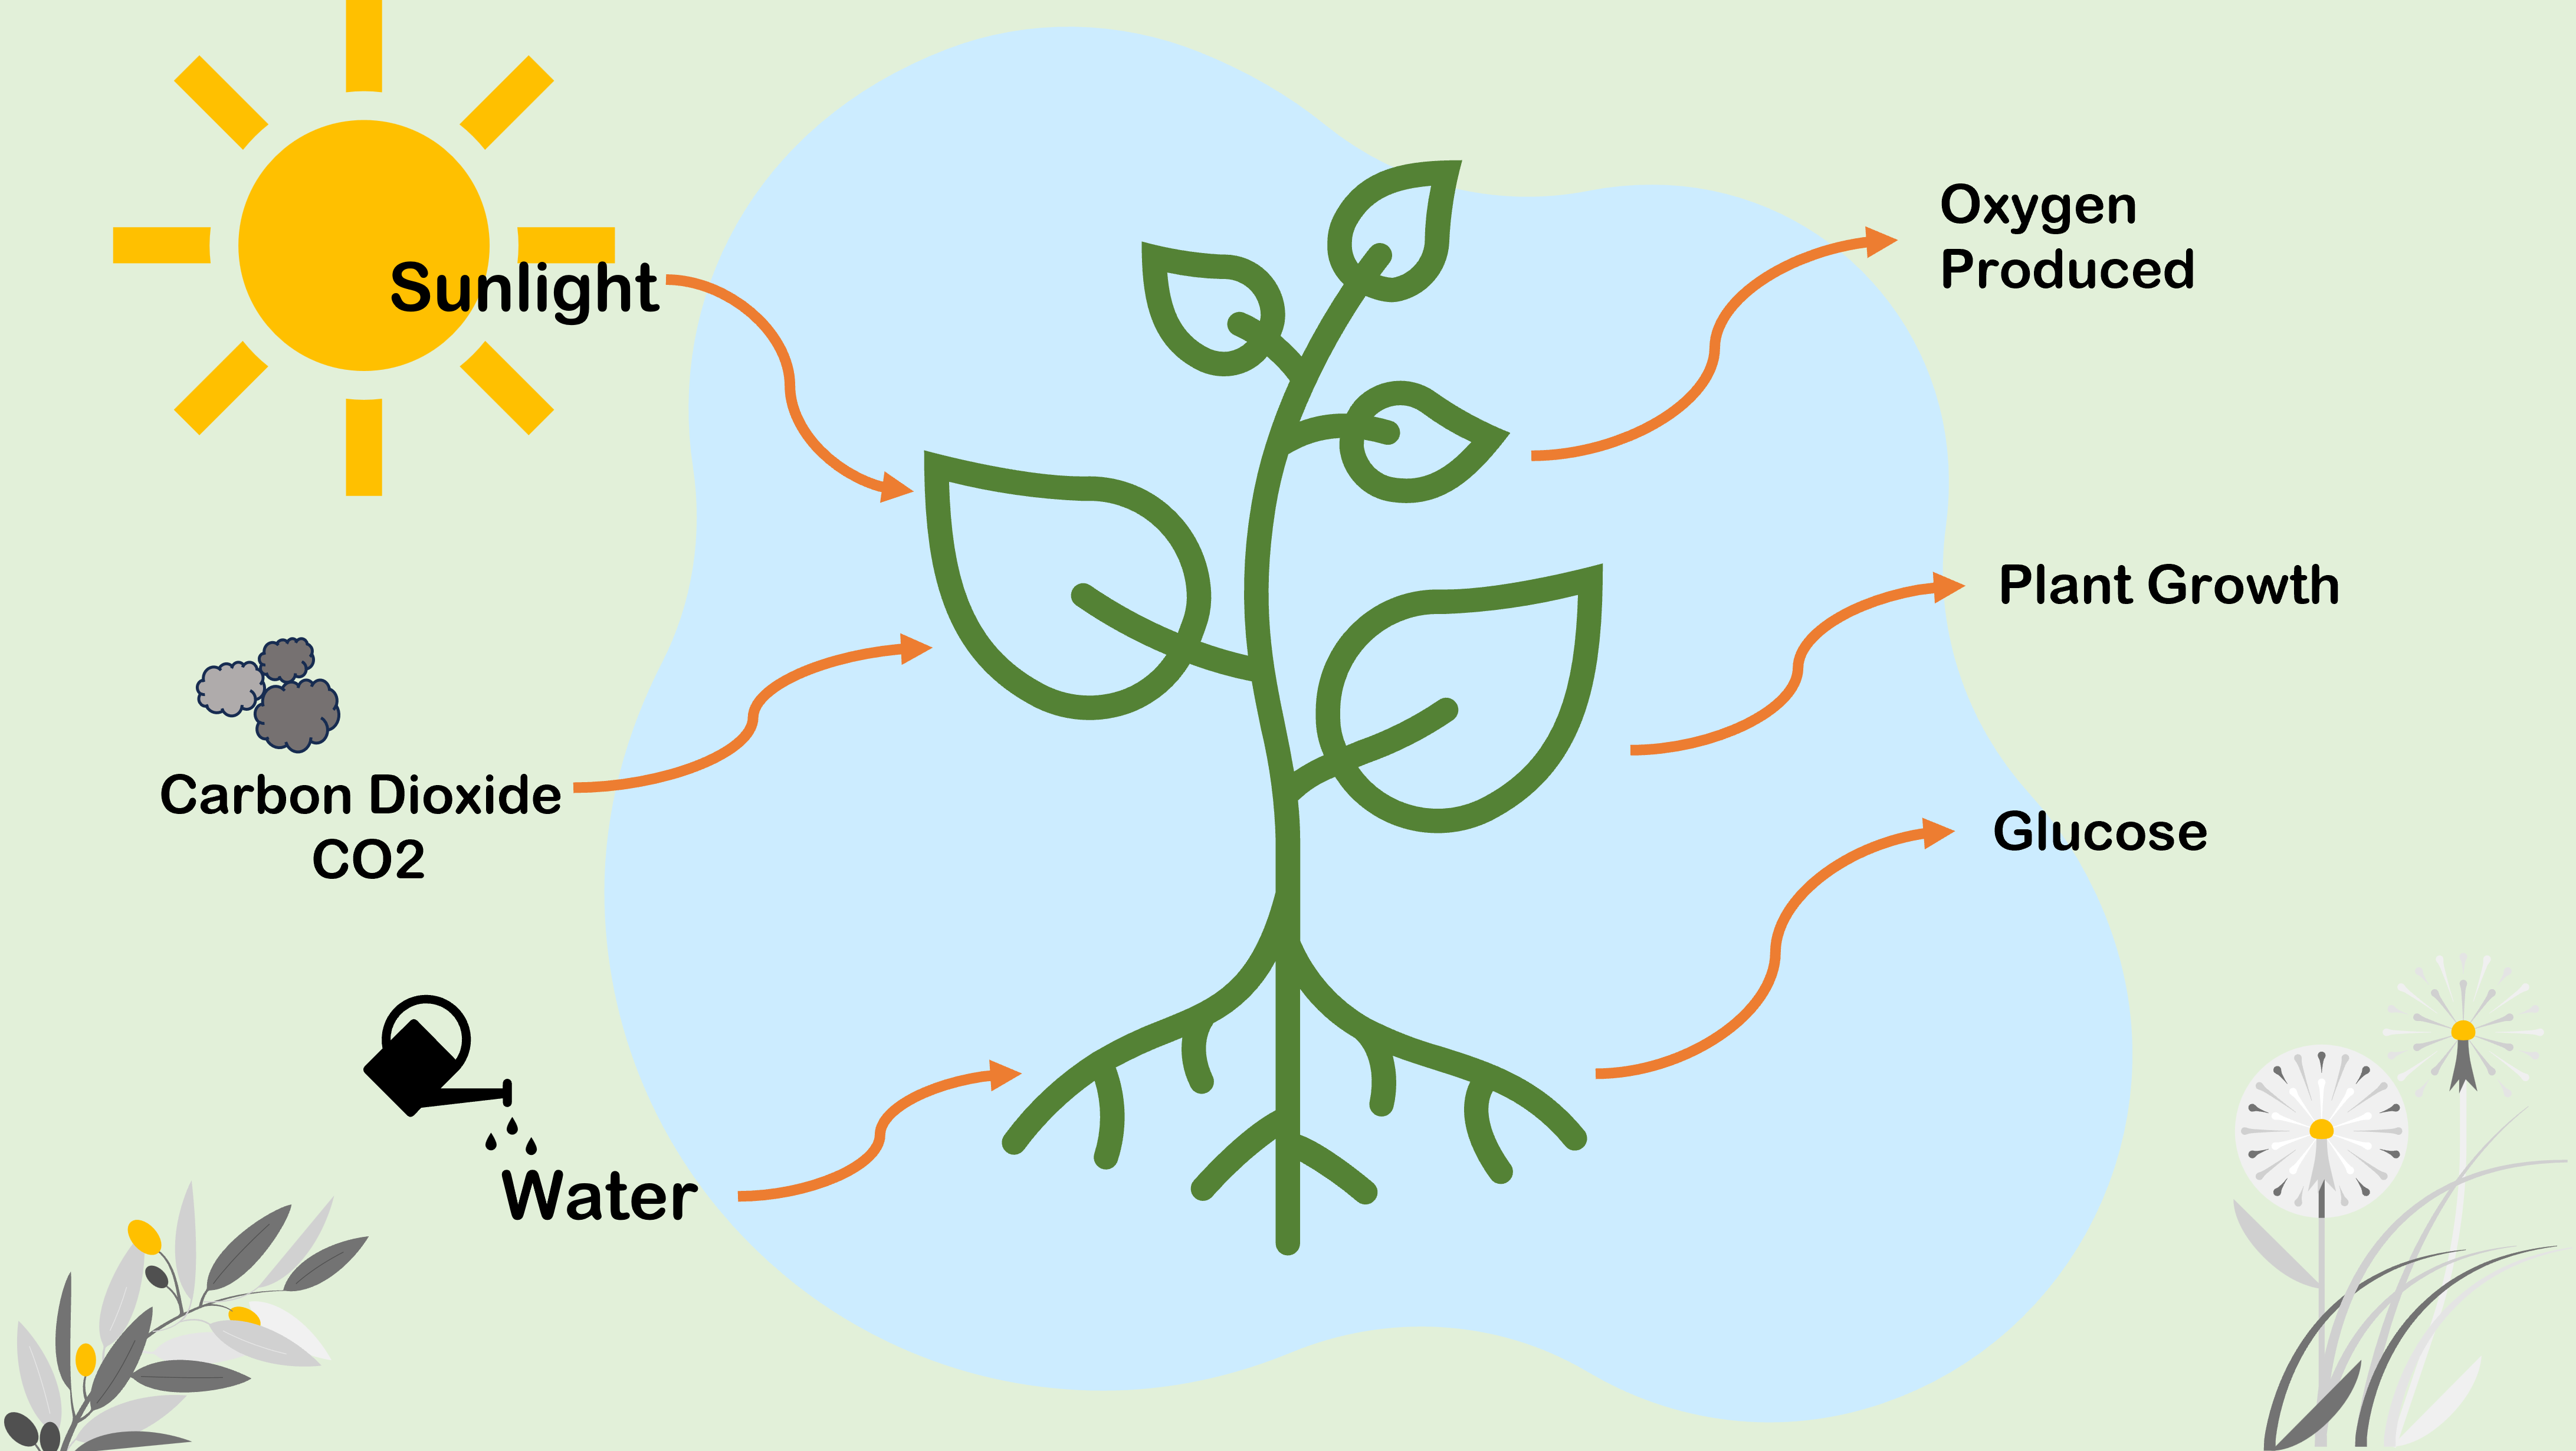 Figure 1 - The process of photosynthesis